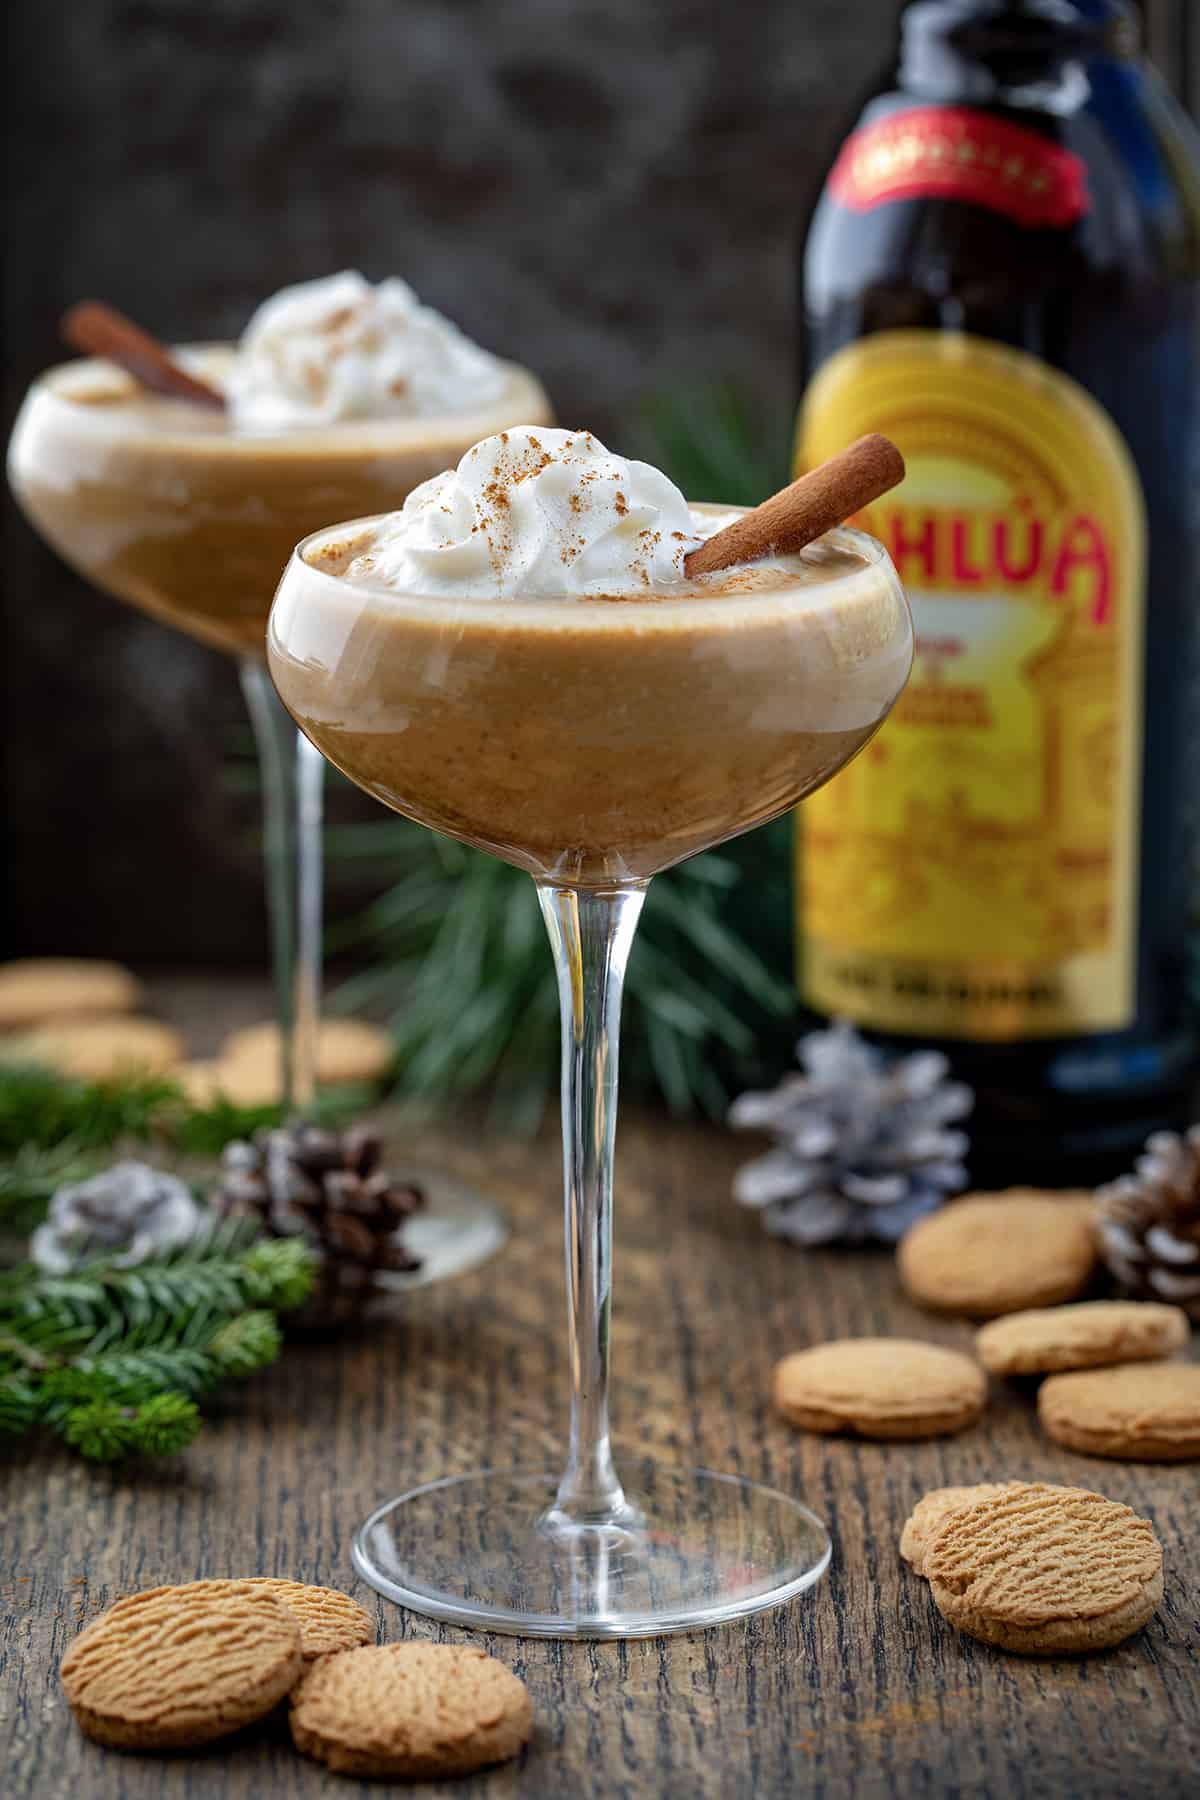 Glasses filled with Gingerbread Martini on a Dark Table.